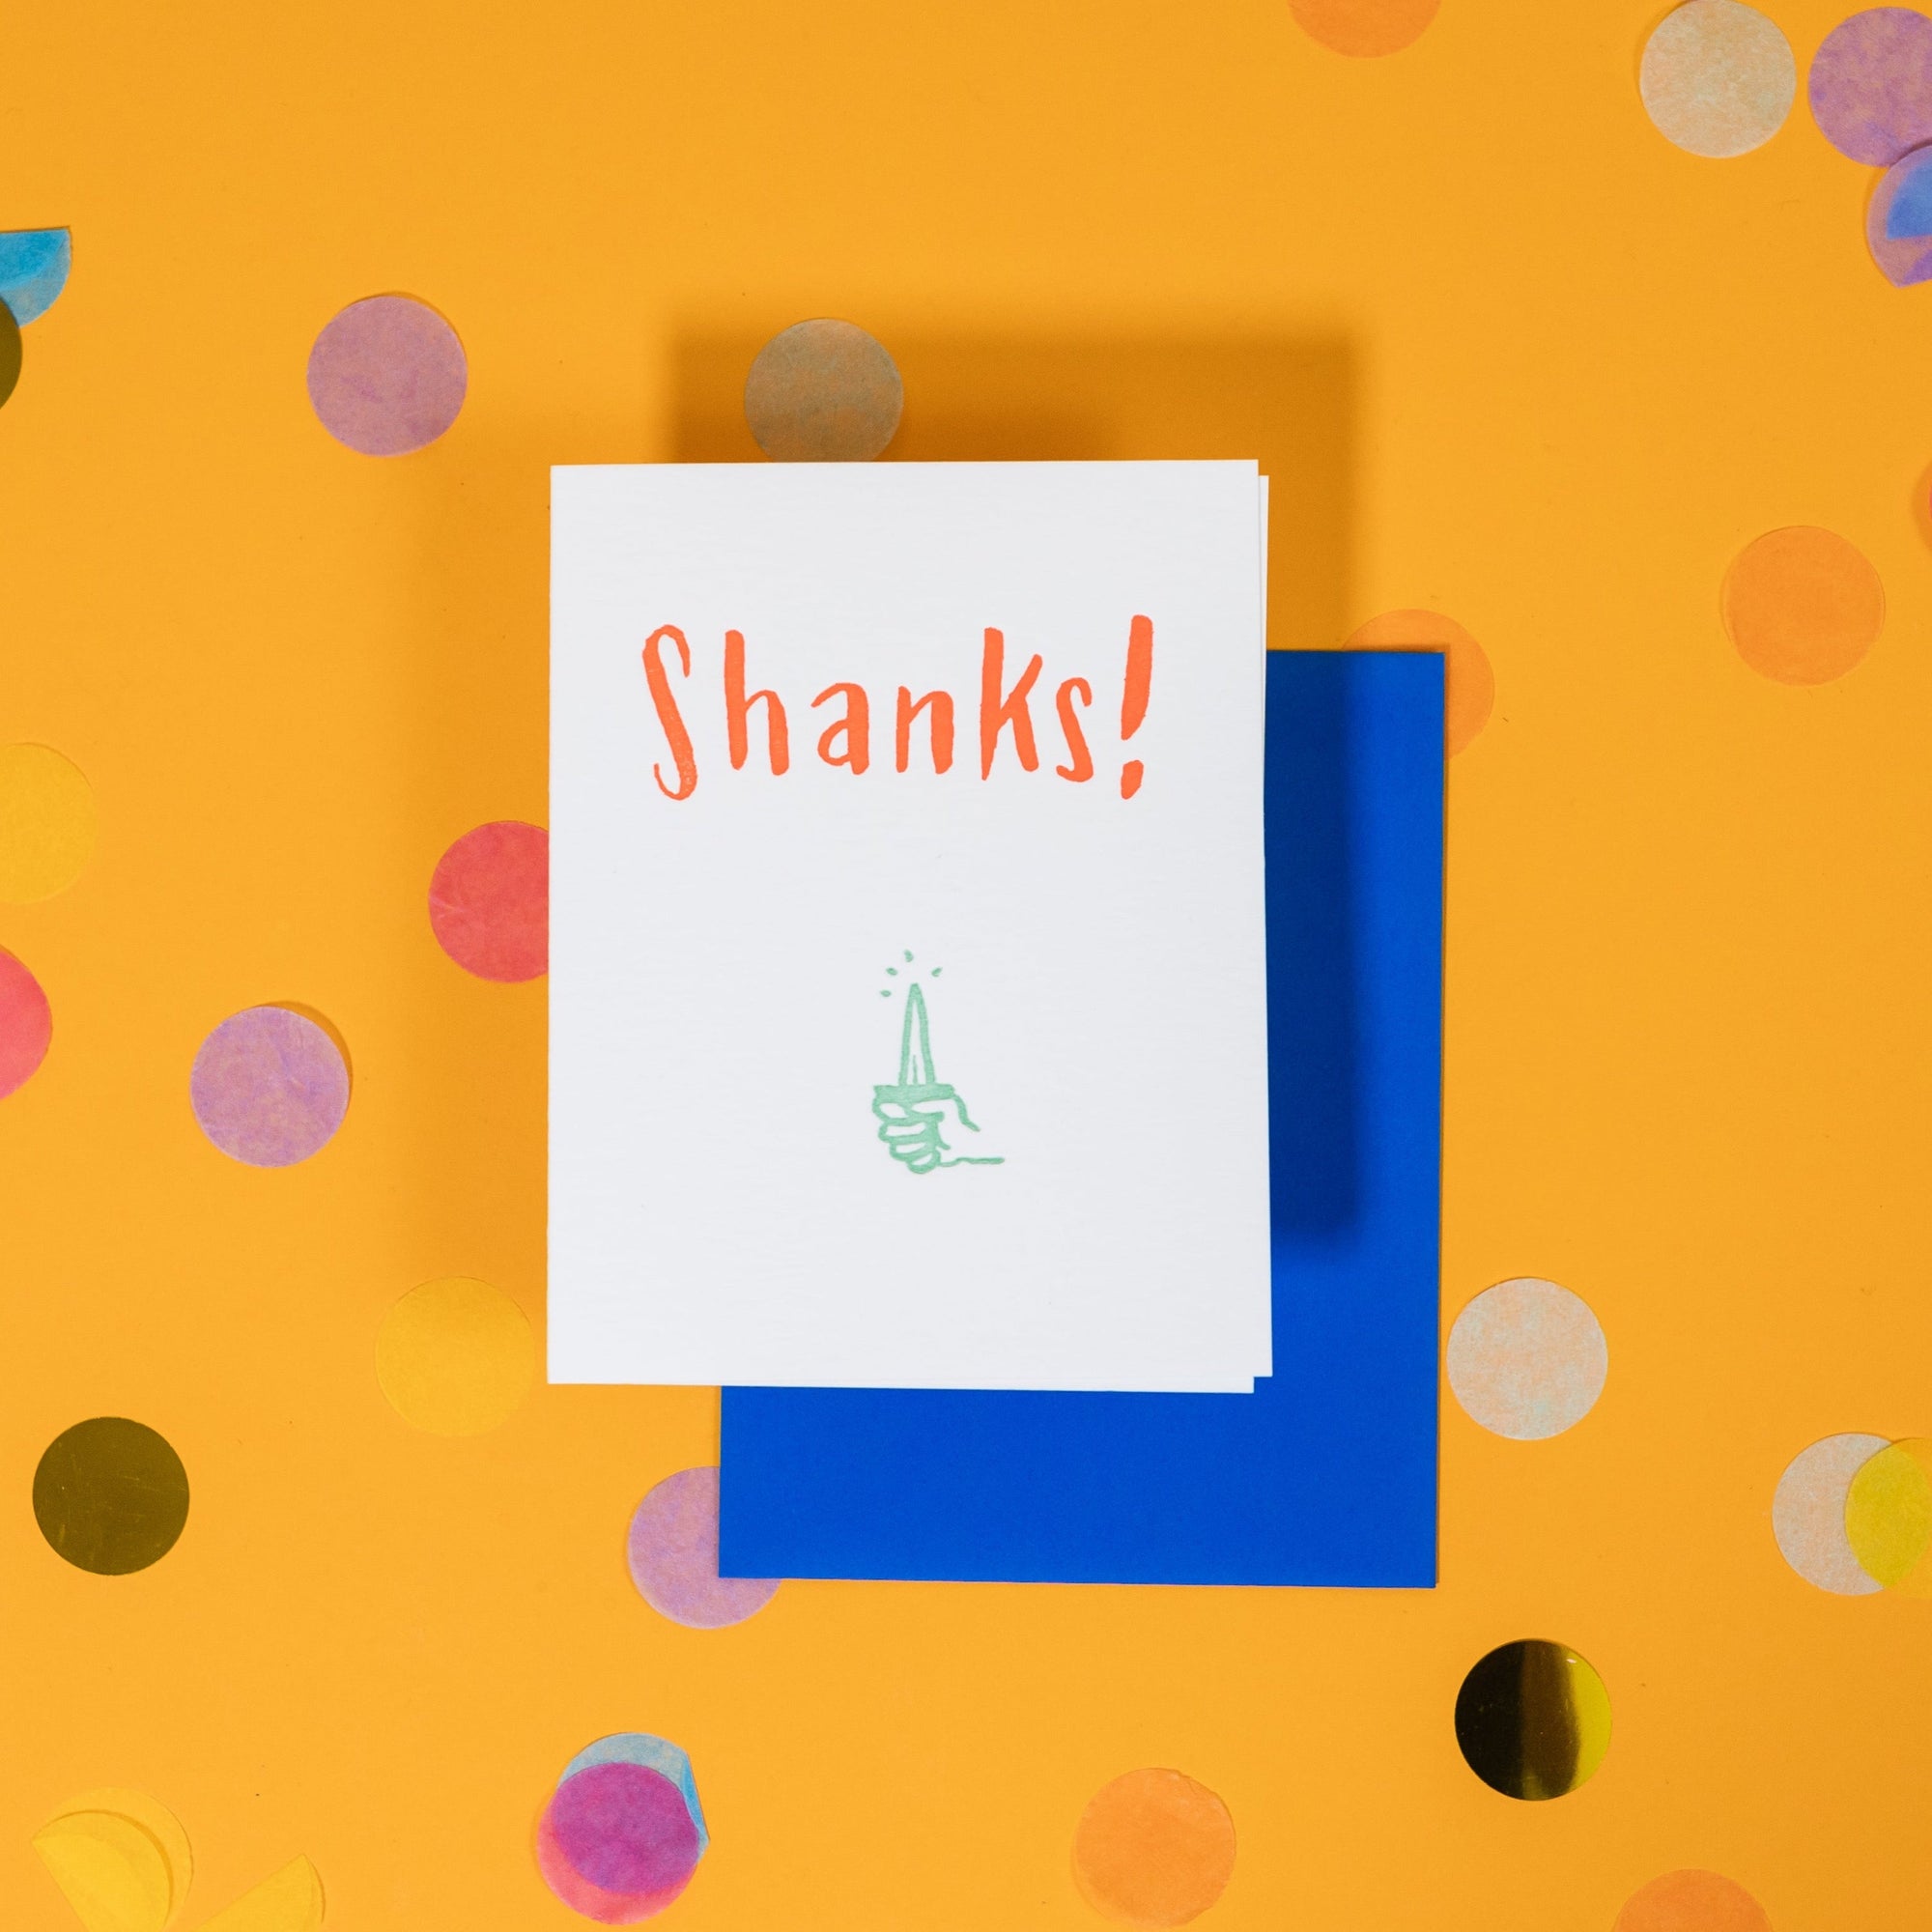 On a sunny mustard background is a greeting card and envelope with big, colorful confetti scattered around. The white greeting card has an illustration of a hand holding a shank in mint and it says "Shanks!" in handwritten orange lettering. The neon blue envelope sits under the card. 